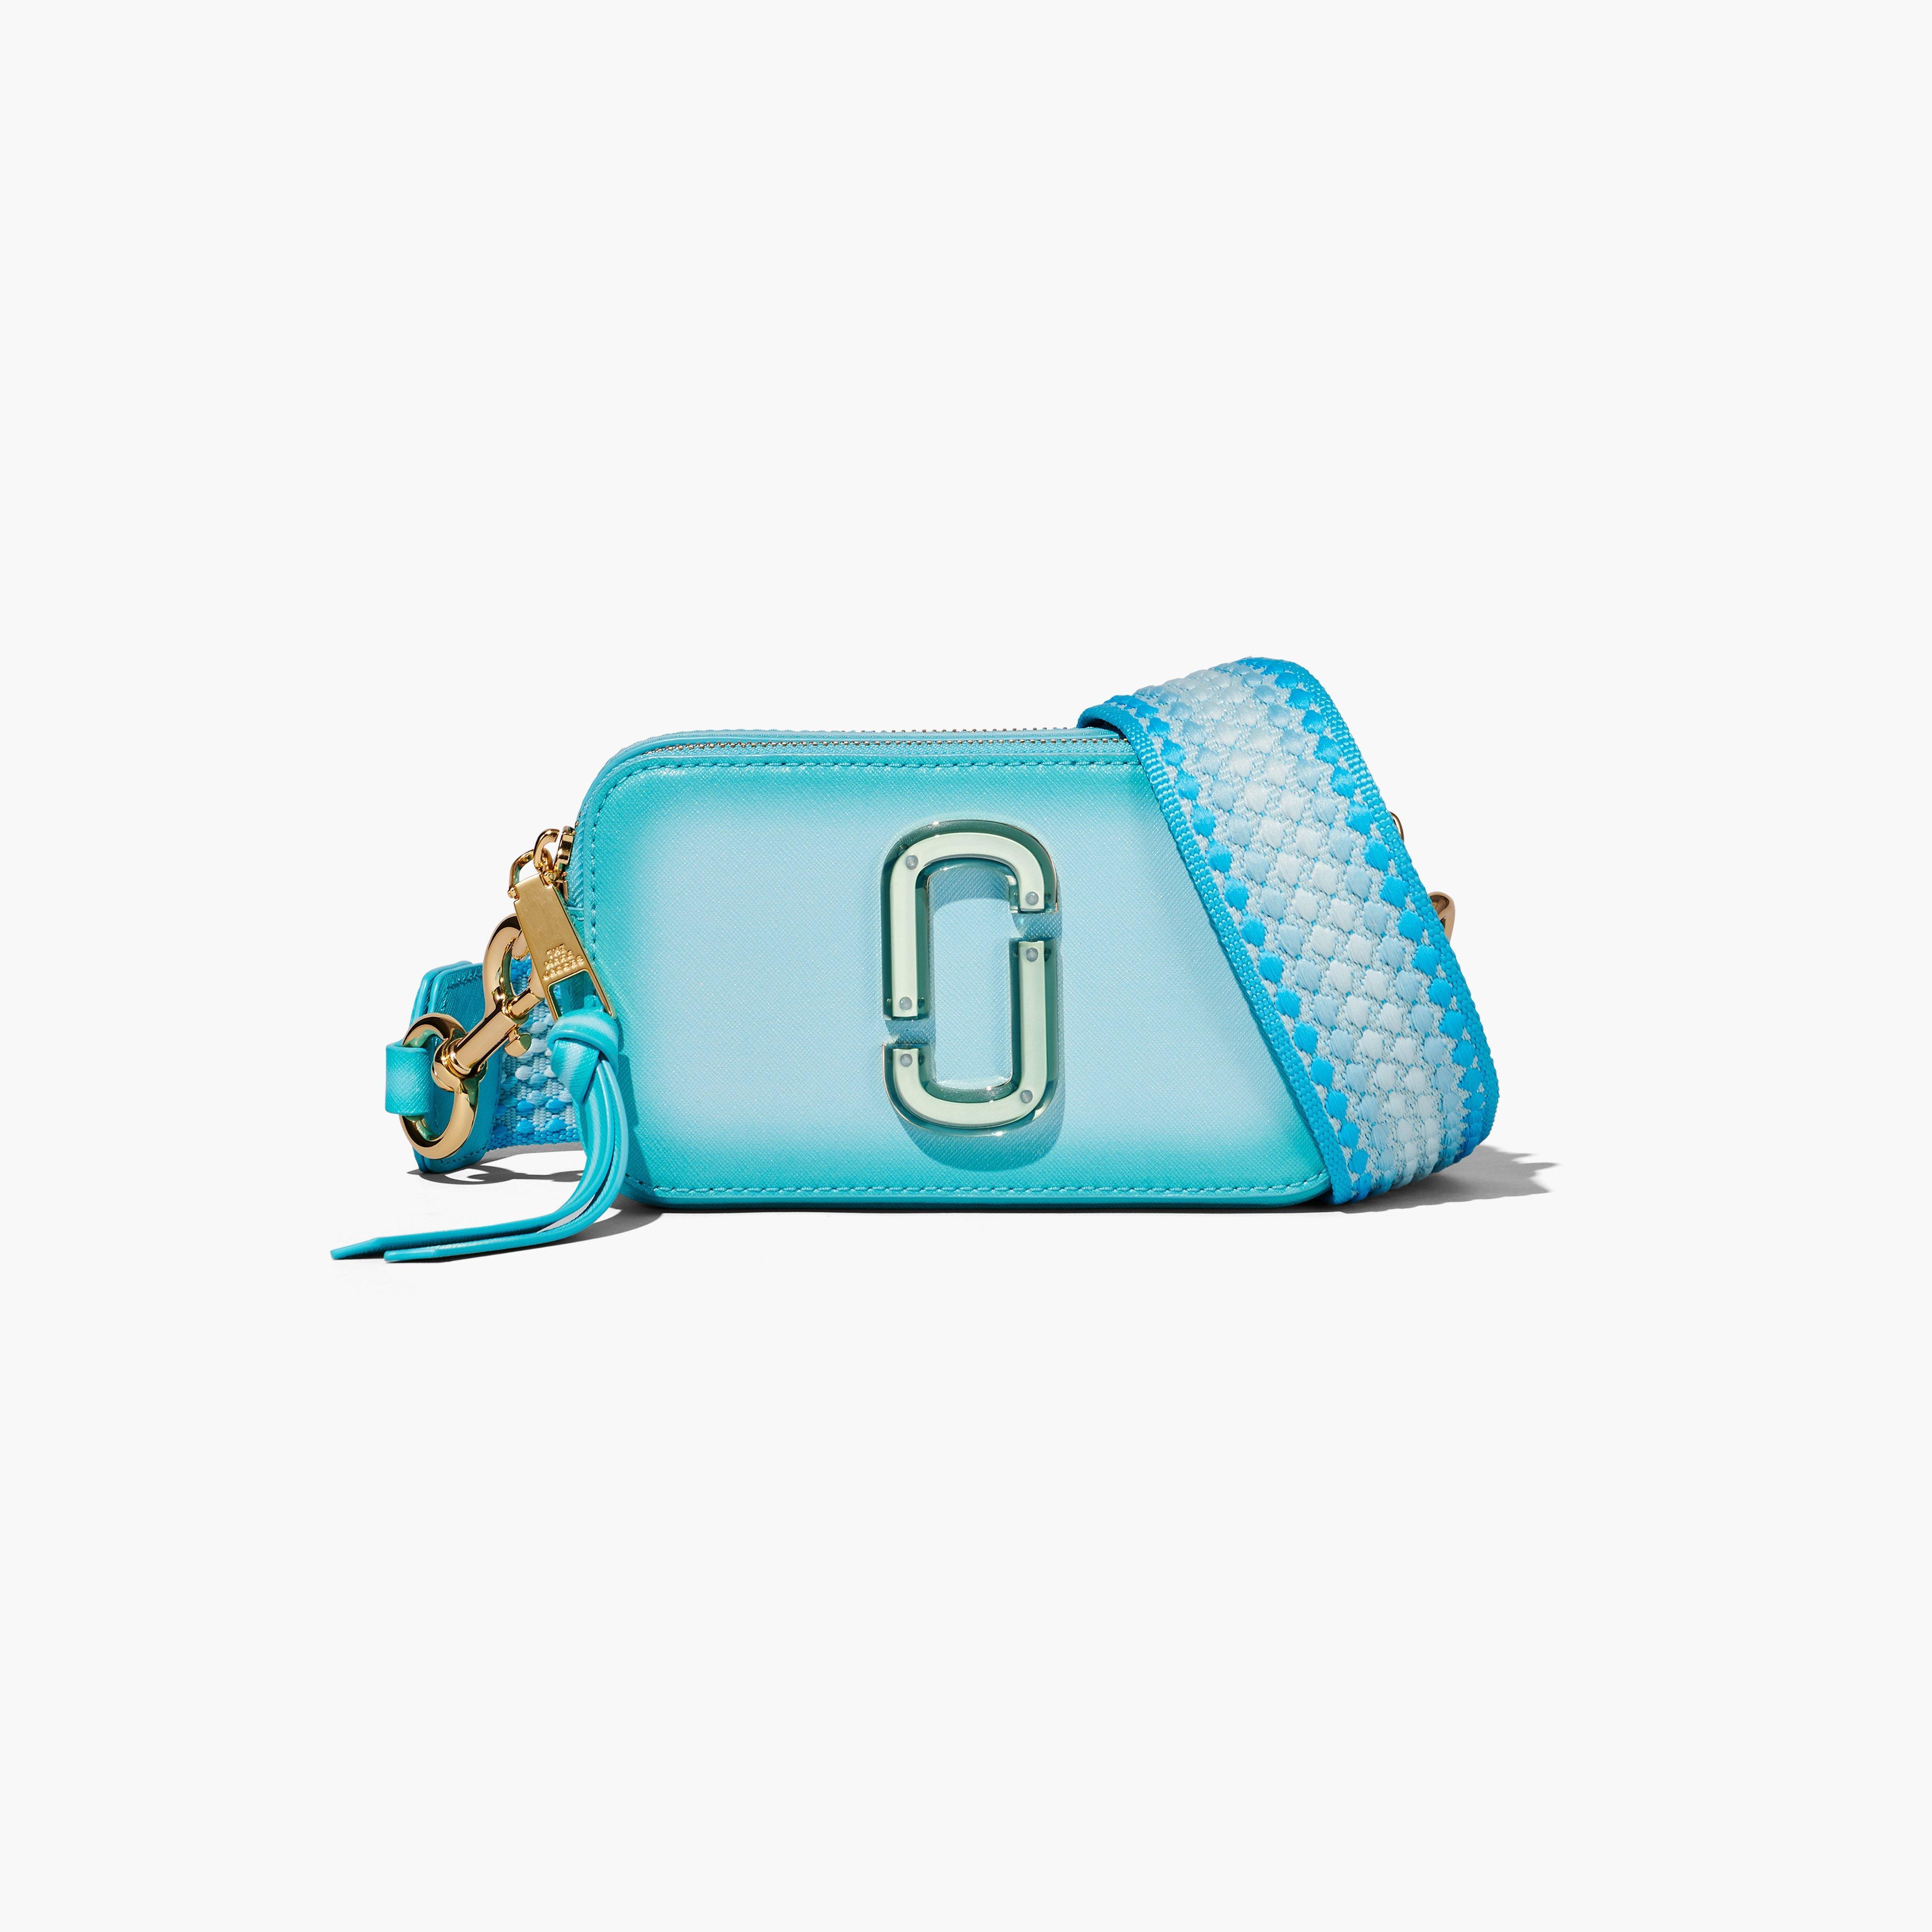 Marc Jacobs The Snapshot Bag in Blue